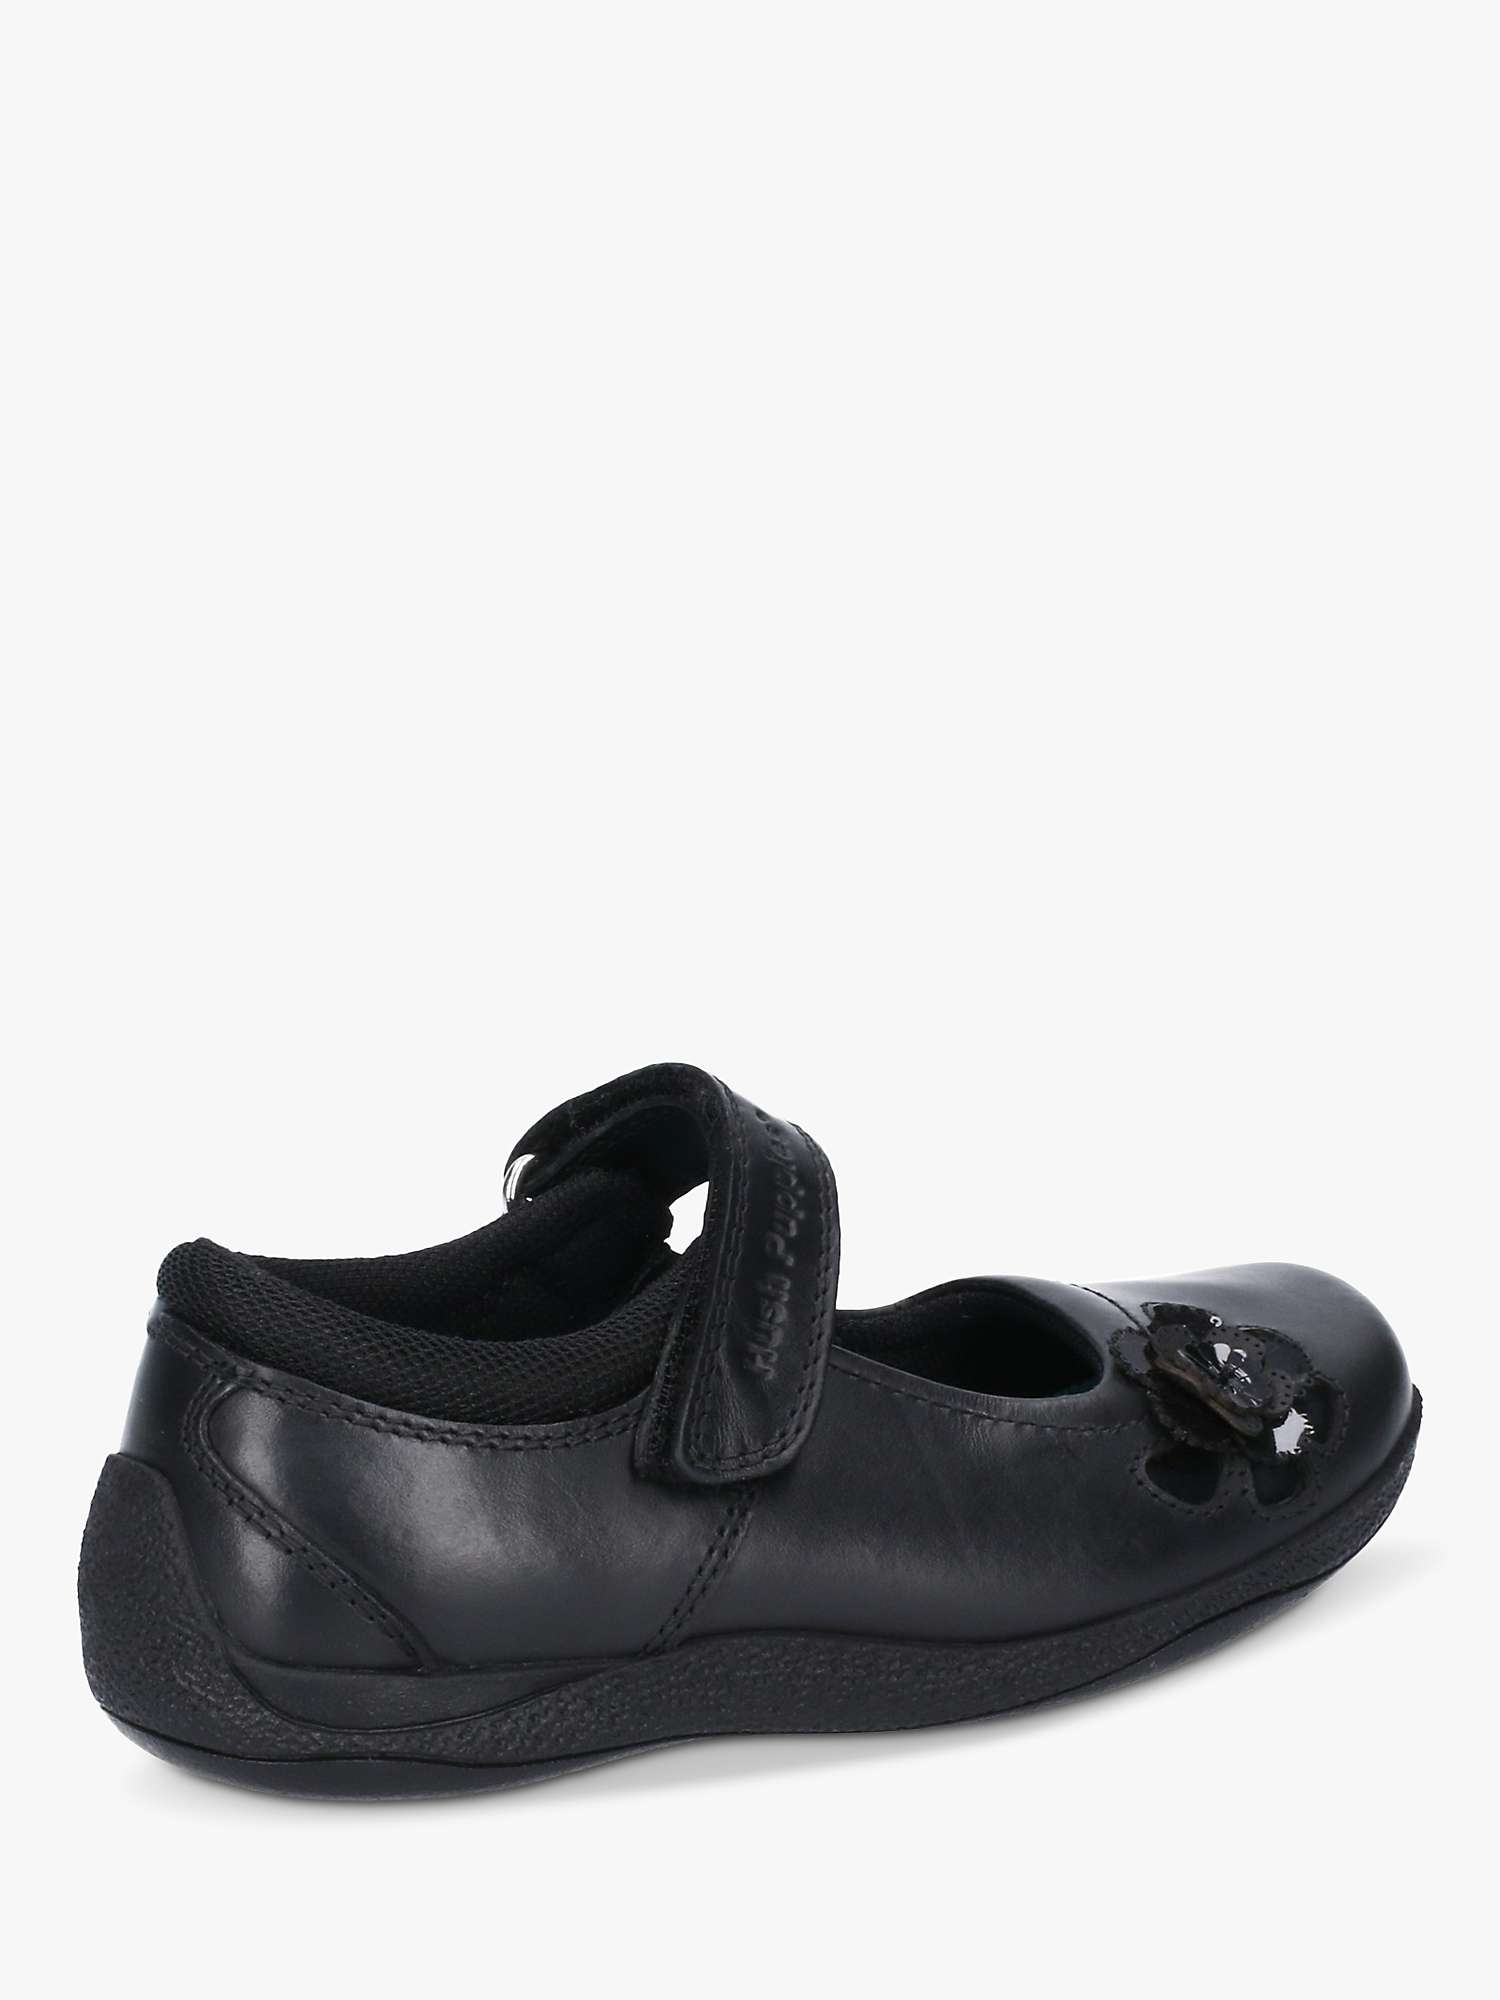 Buy Hush Puppies Kids' Jessica Senior Leather Mary Jane Shoes, Black Online at johnlewis.com